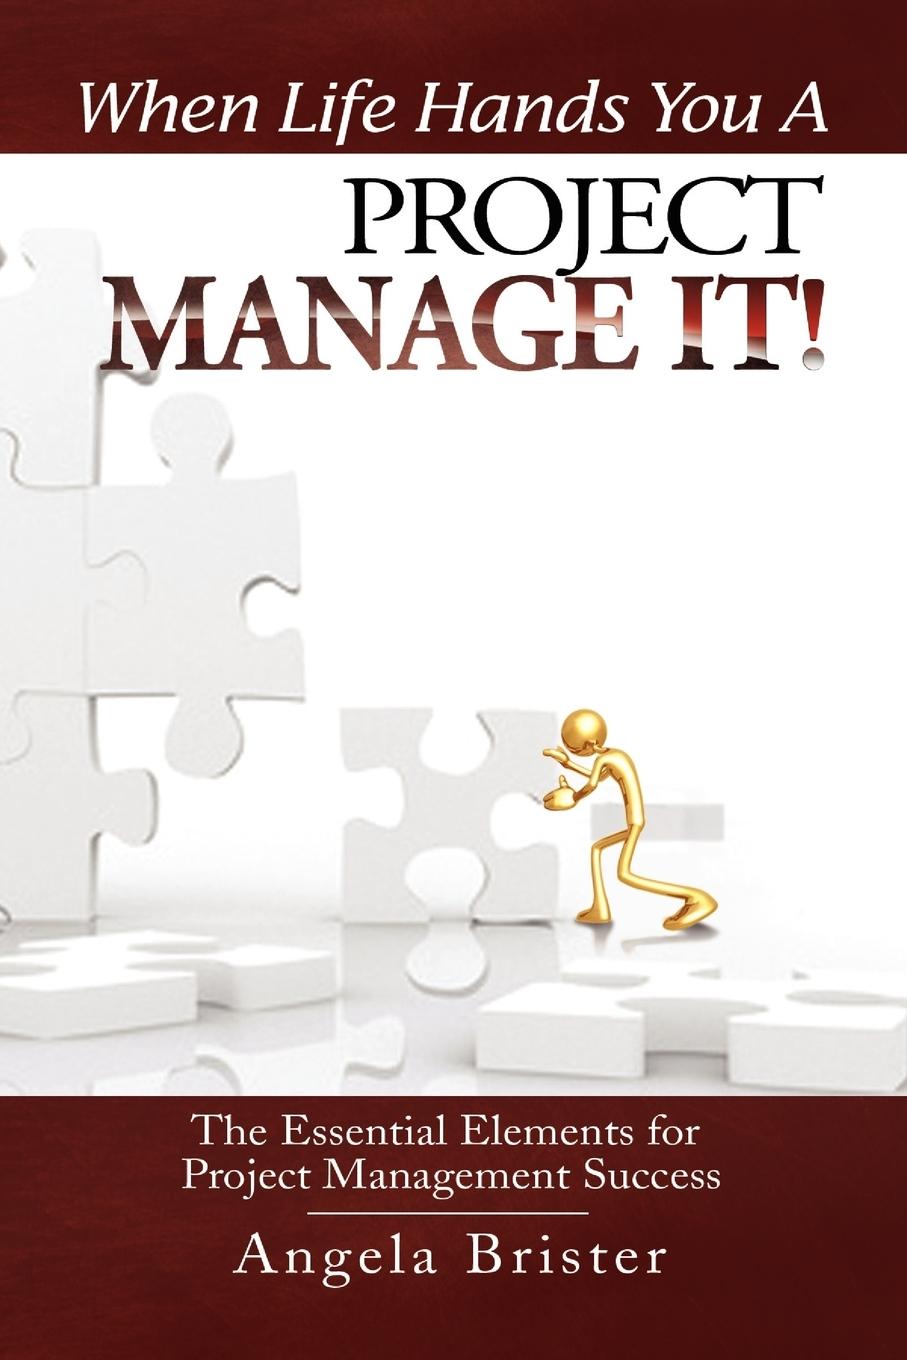 When Life Hands You A Project, Manage It! - Brister, Angela